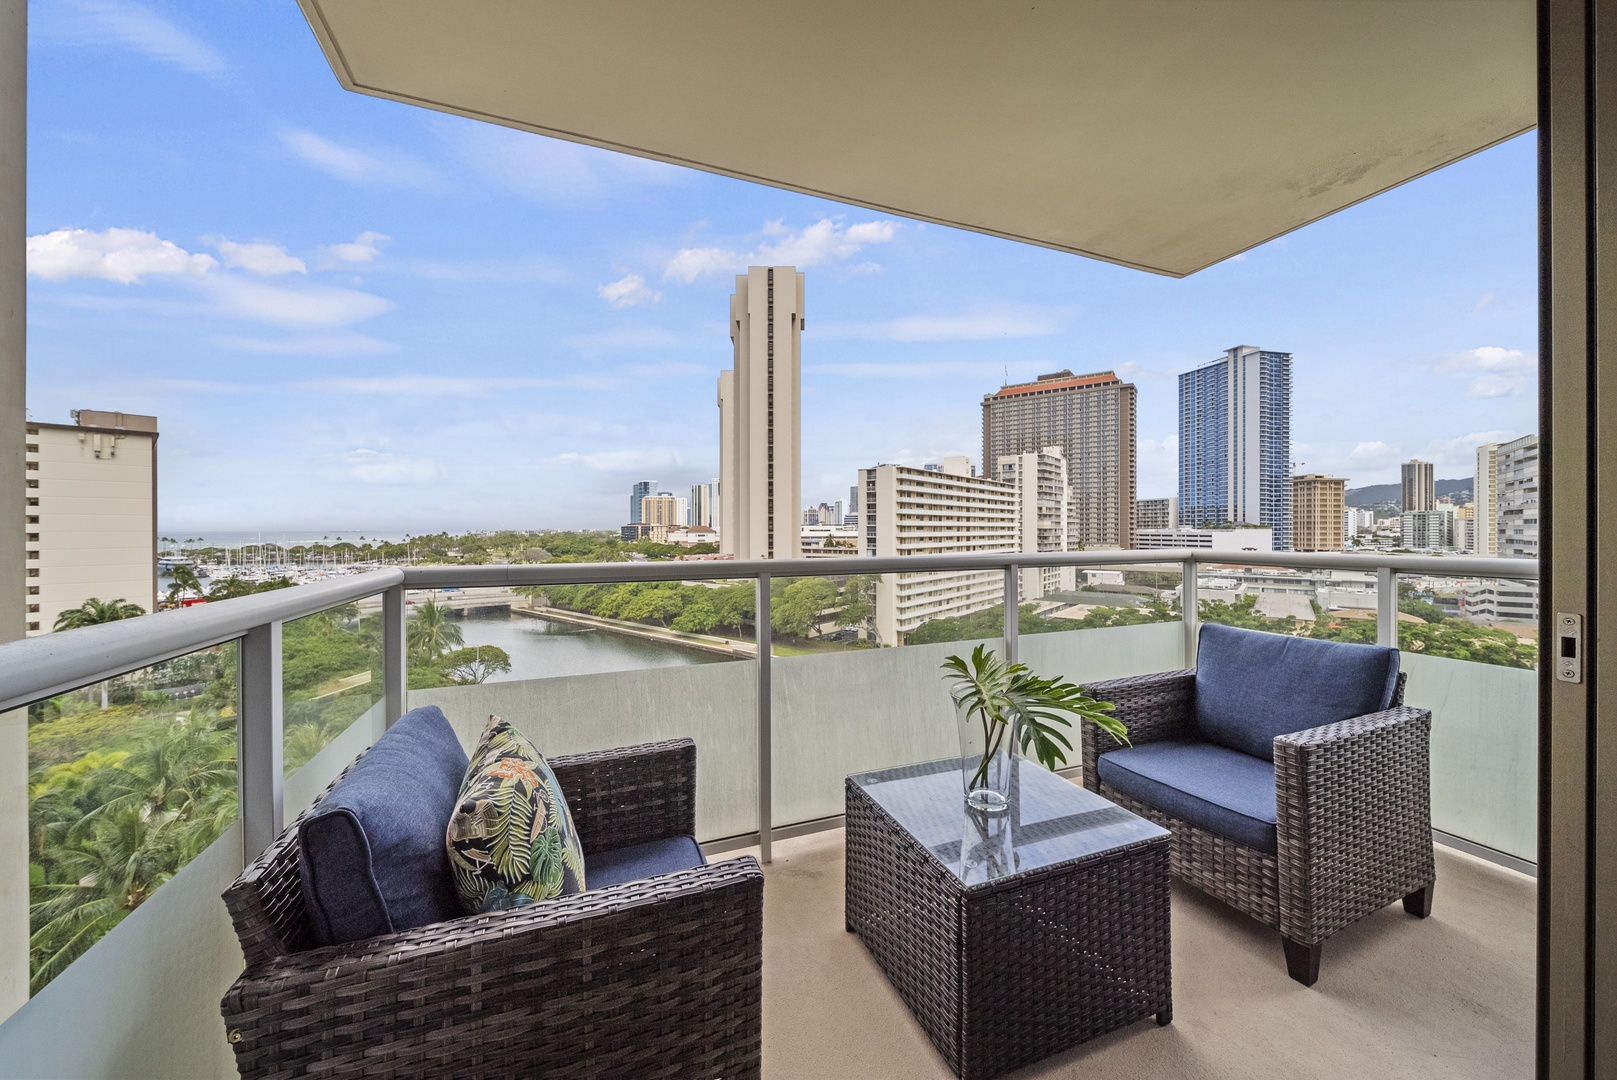 Honolulu Vacation Rentals, Watermark Waikiki Unit 901 - Enjoy a cup of coffee and the the panoramic city views from the lanai.